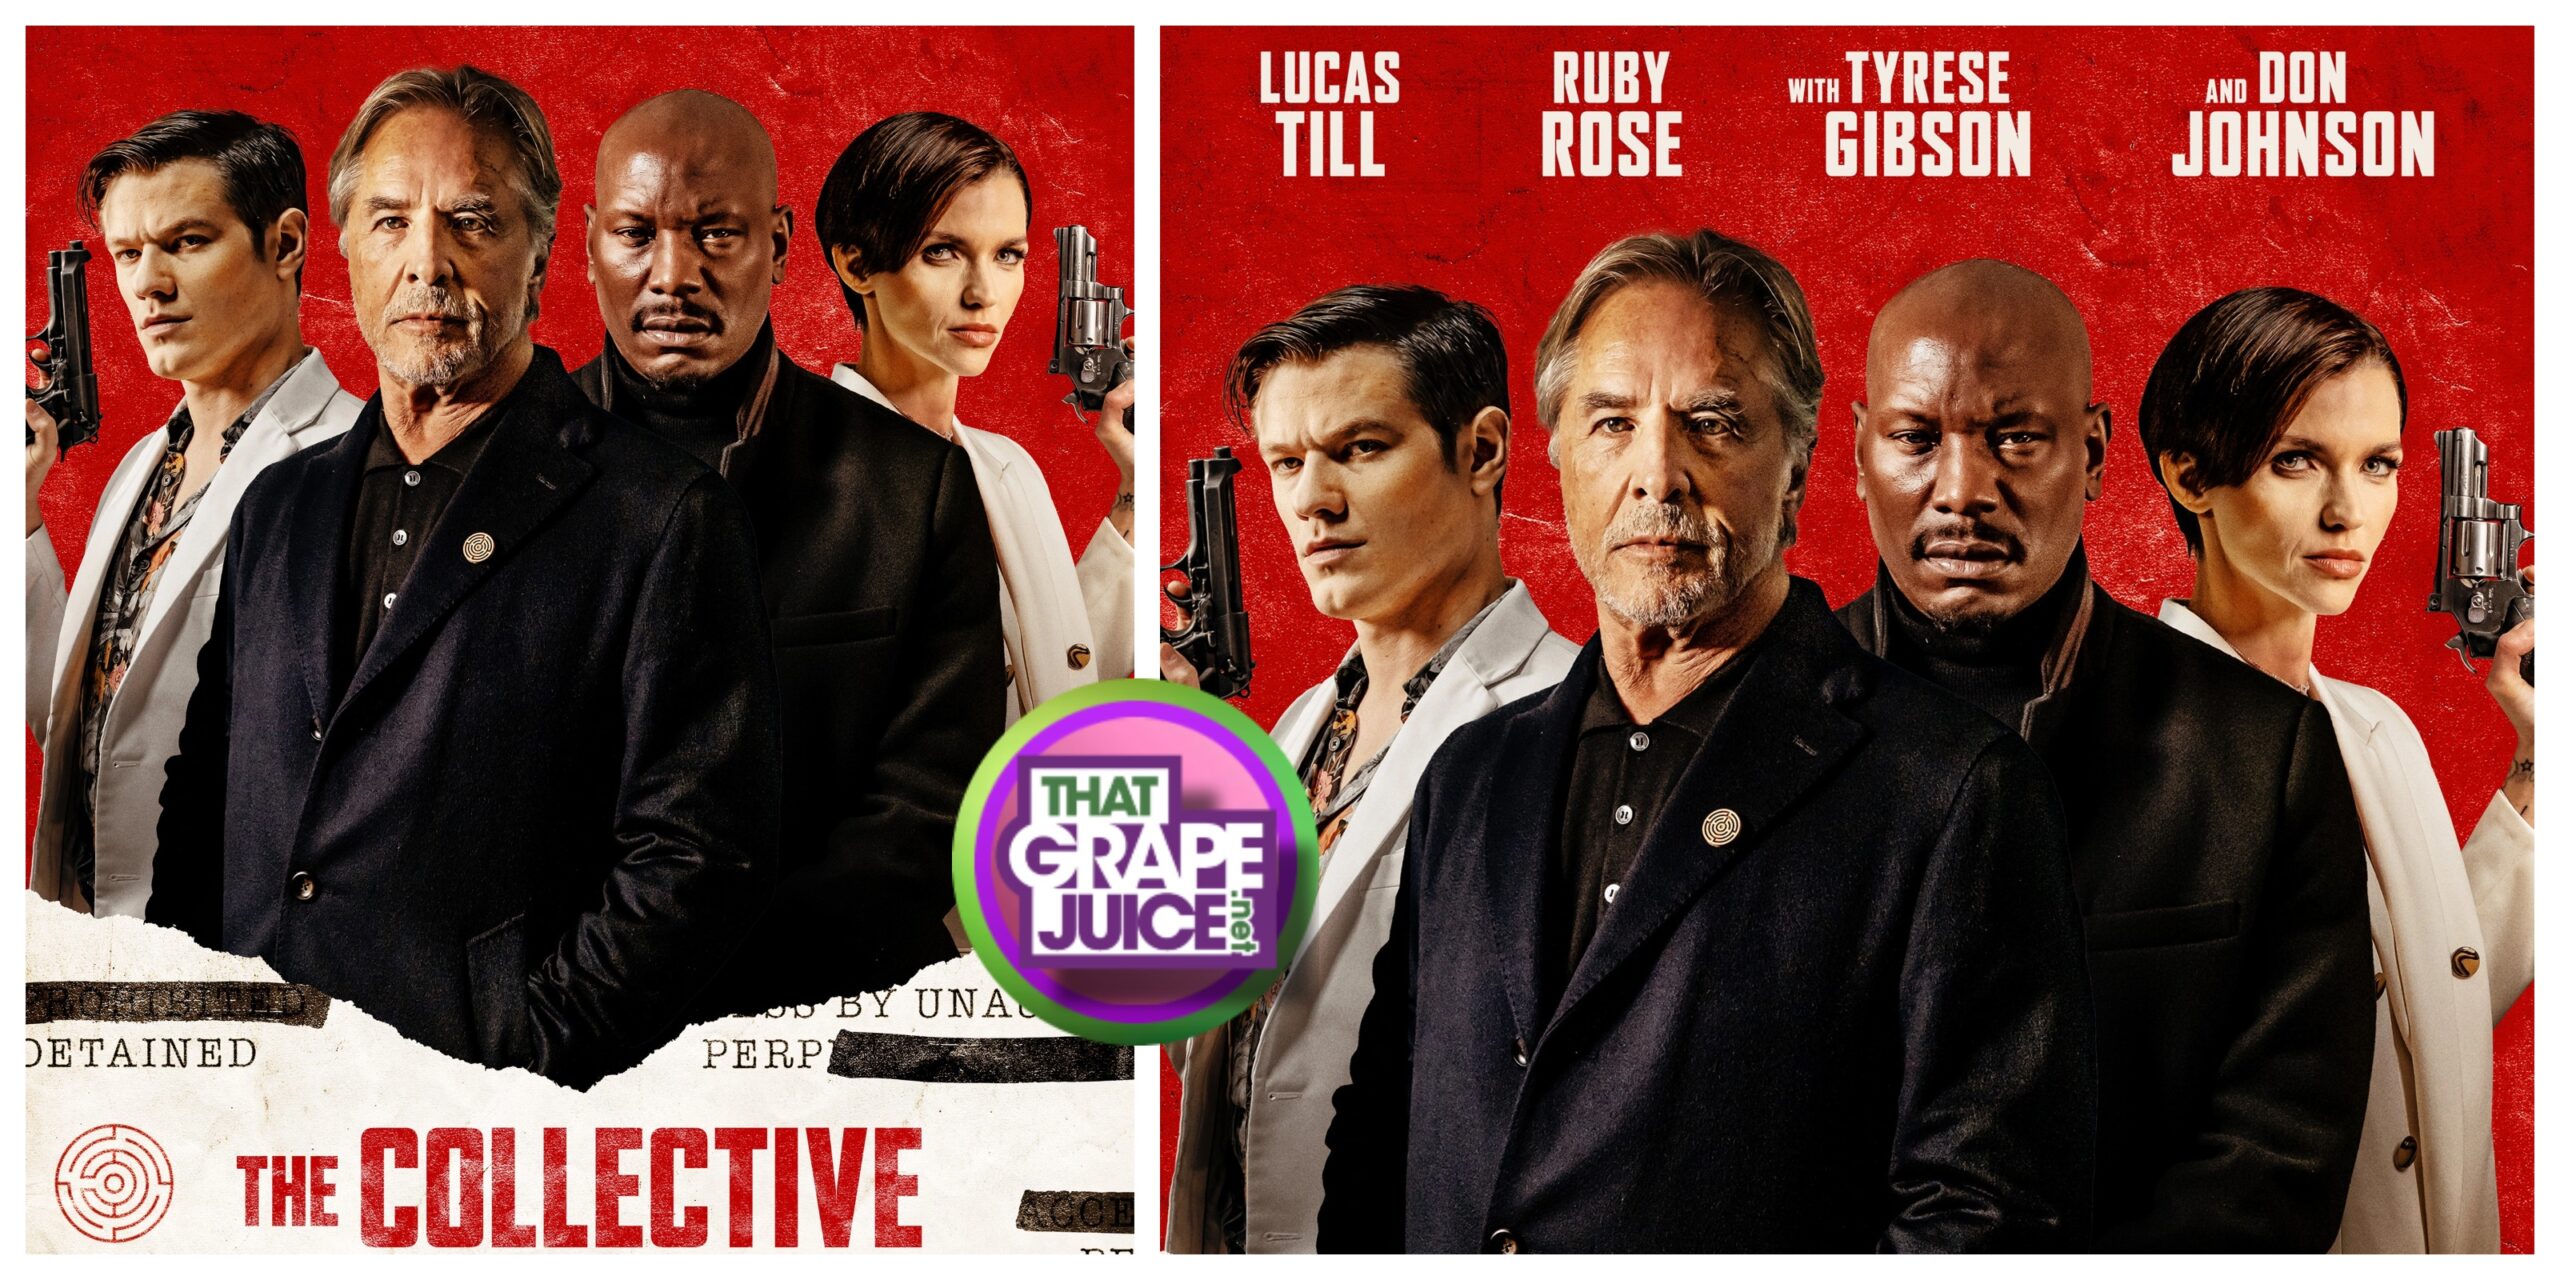 Movie Trailer 'The Collective' [Starring Tyrese Gibson, Don Johnson